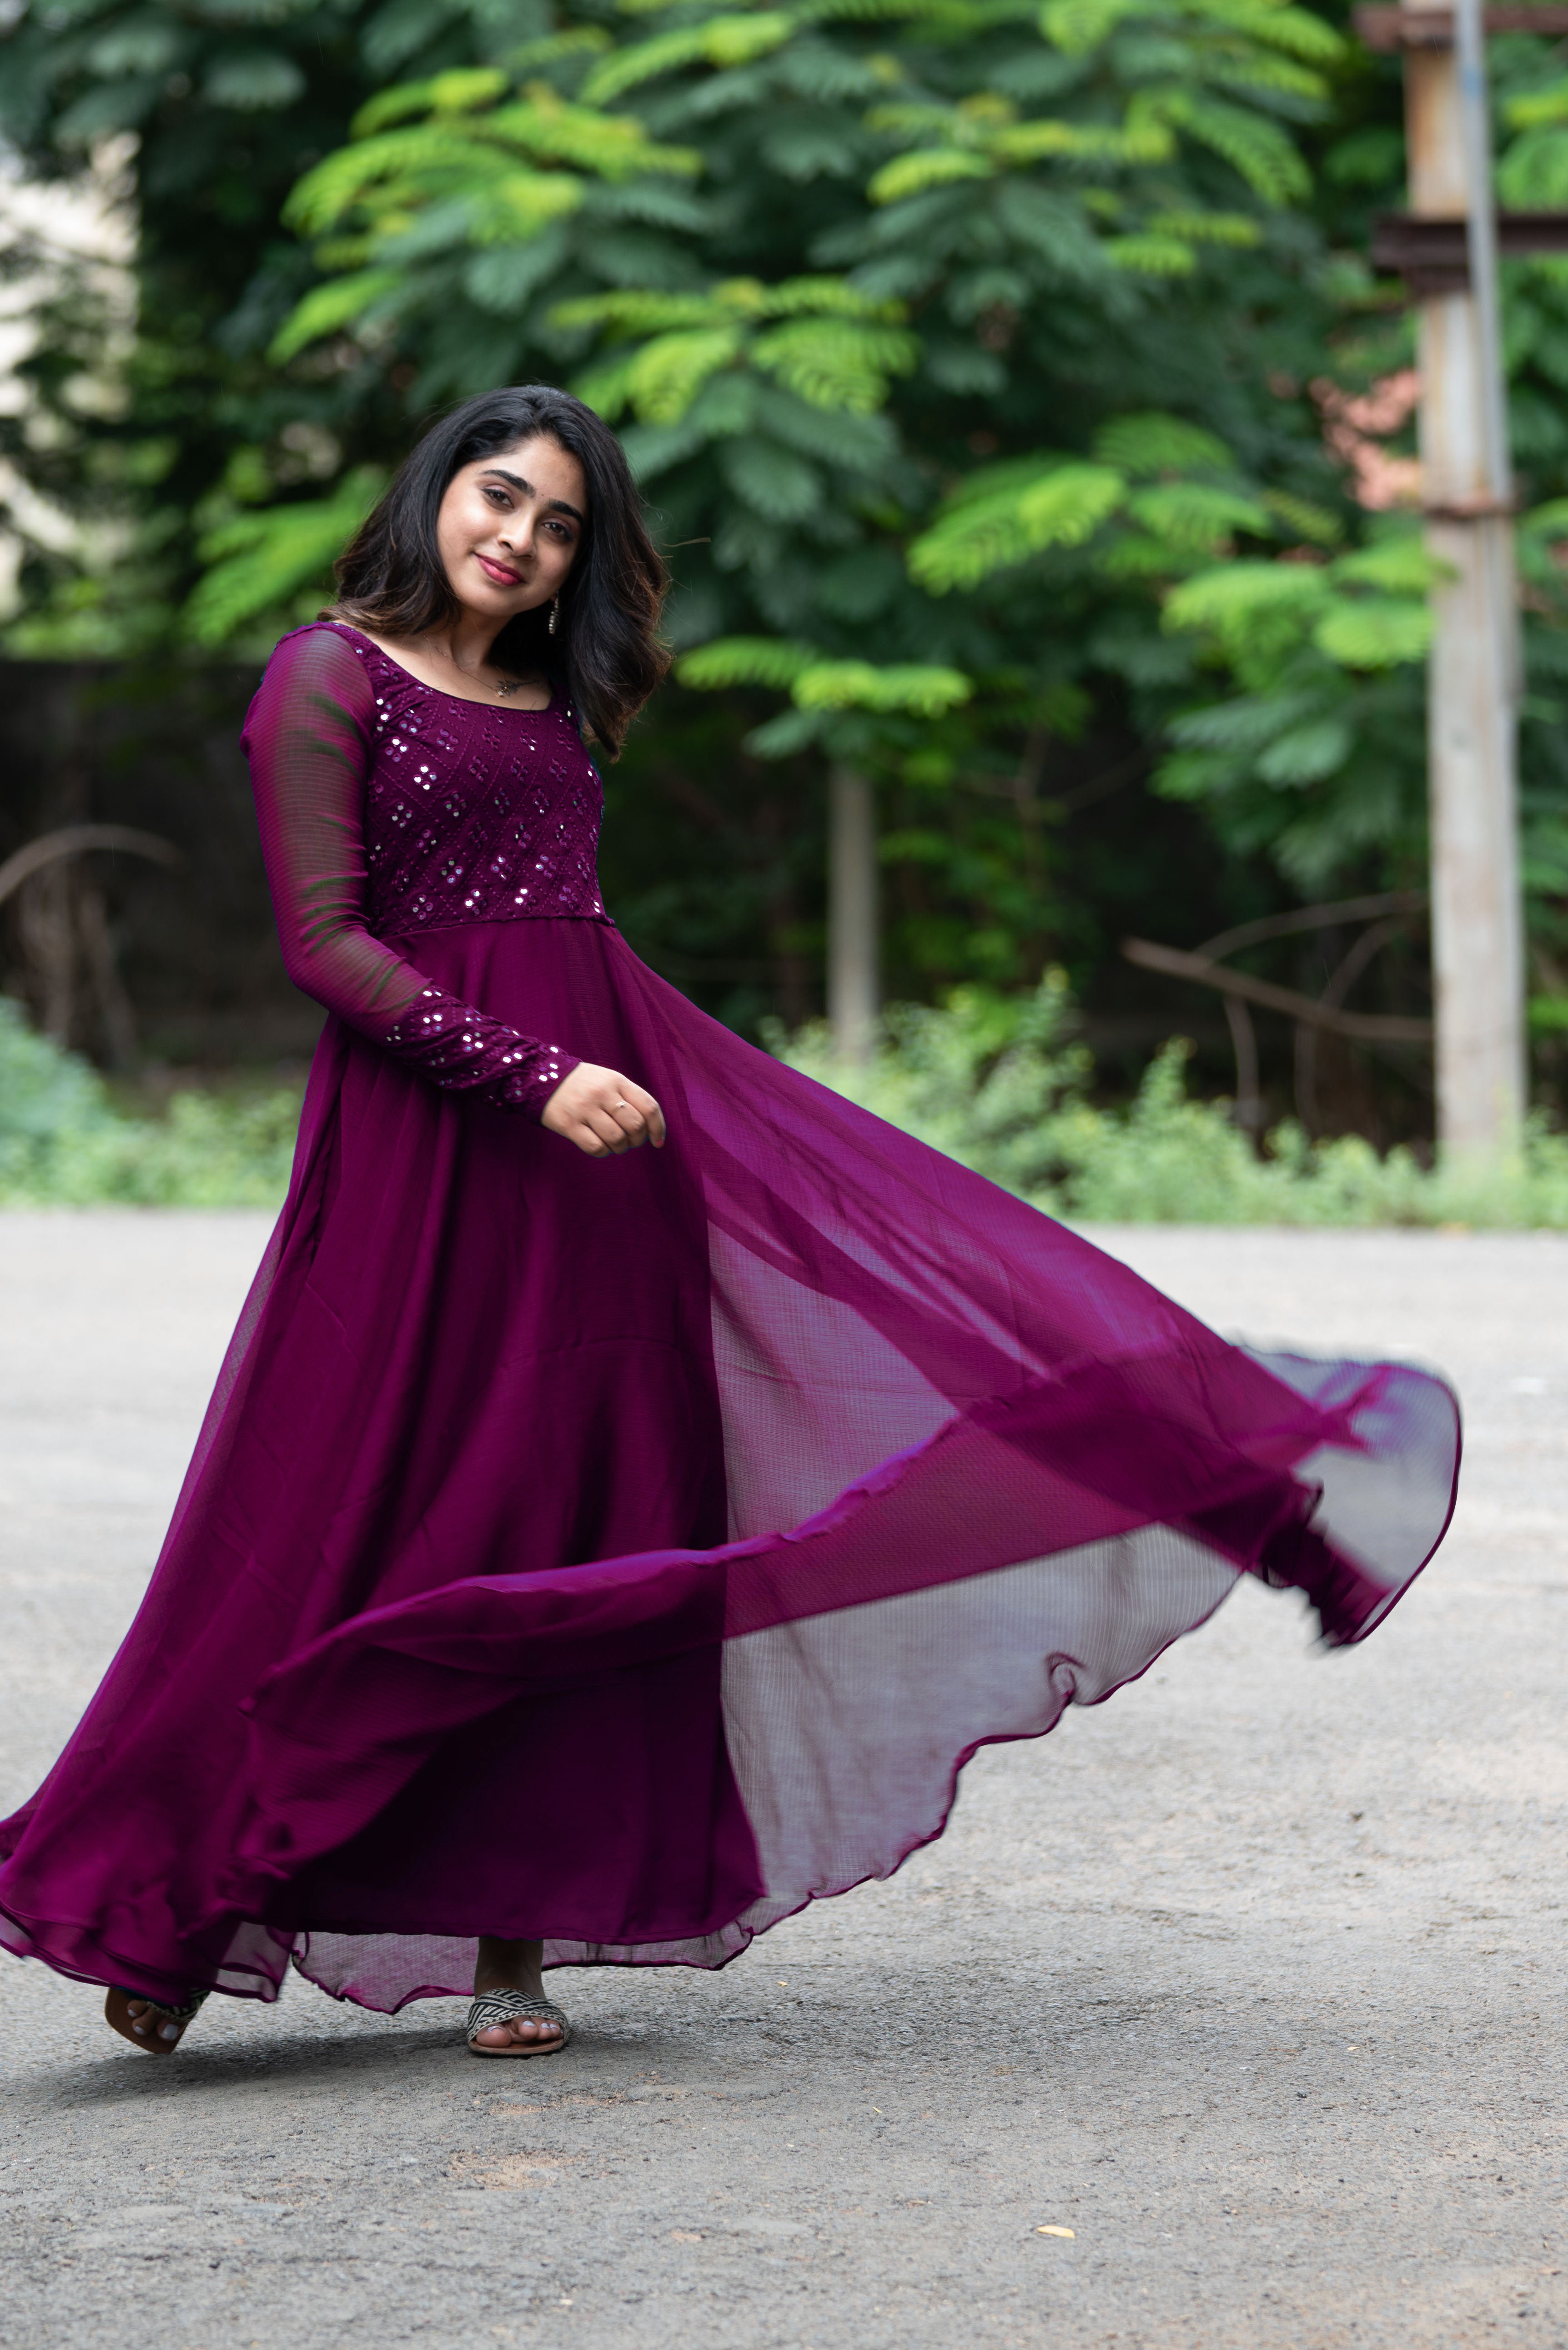 Get ready for any occasion with our selection of gorgeous georgette maxi dresses for weddings. Choose from our range of mirror embroidered, Indo-western and bridesmaid dresses to look amazing.